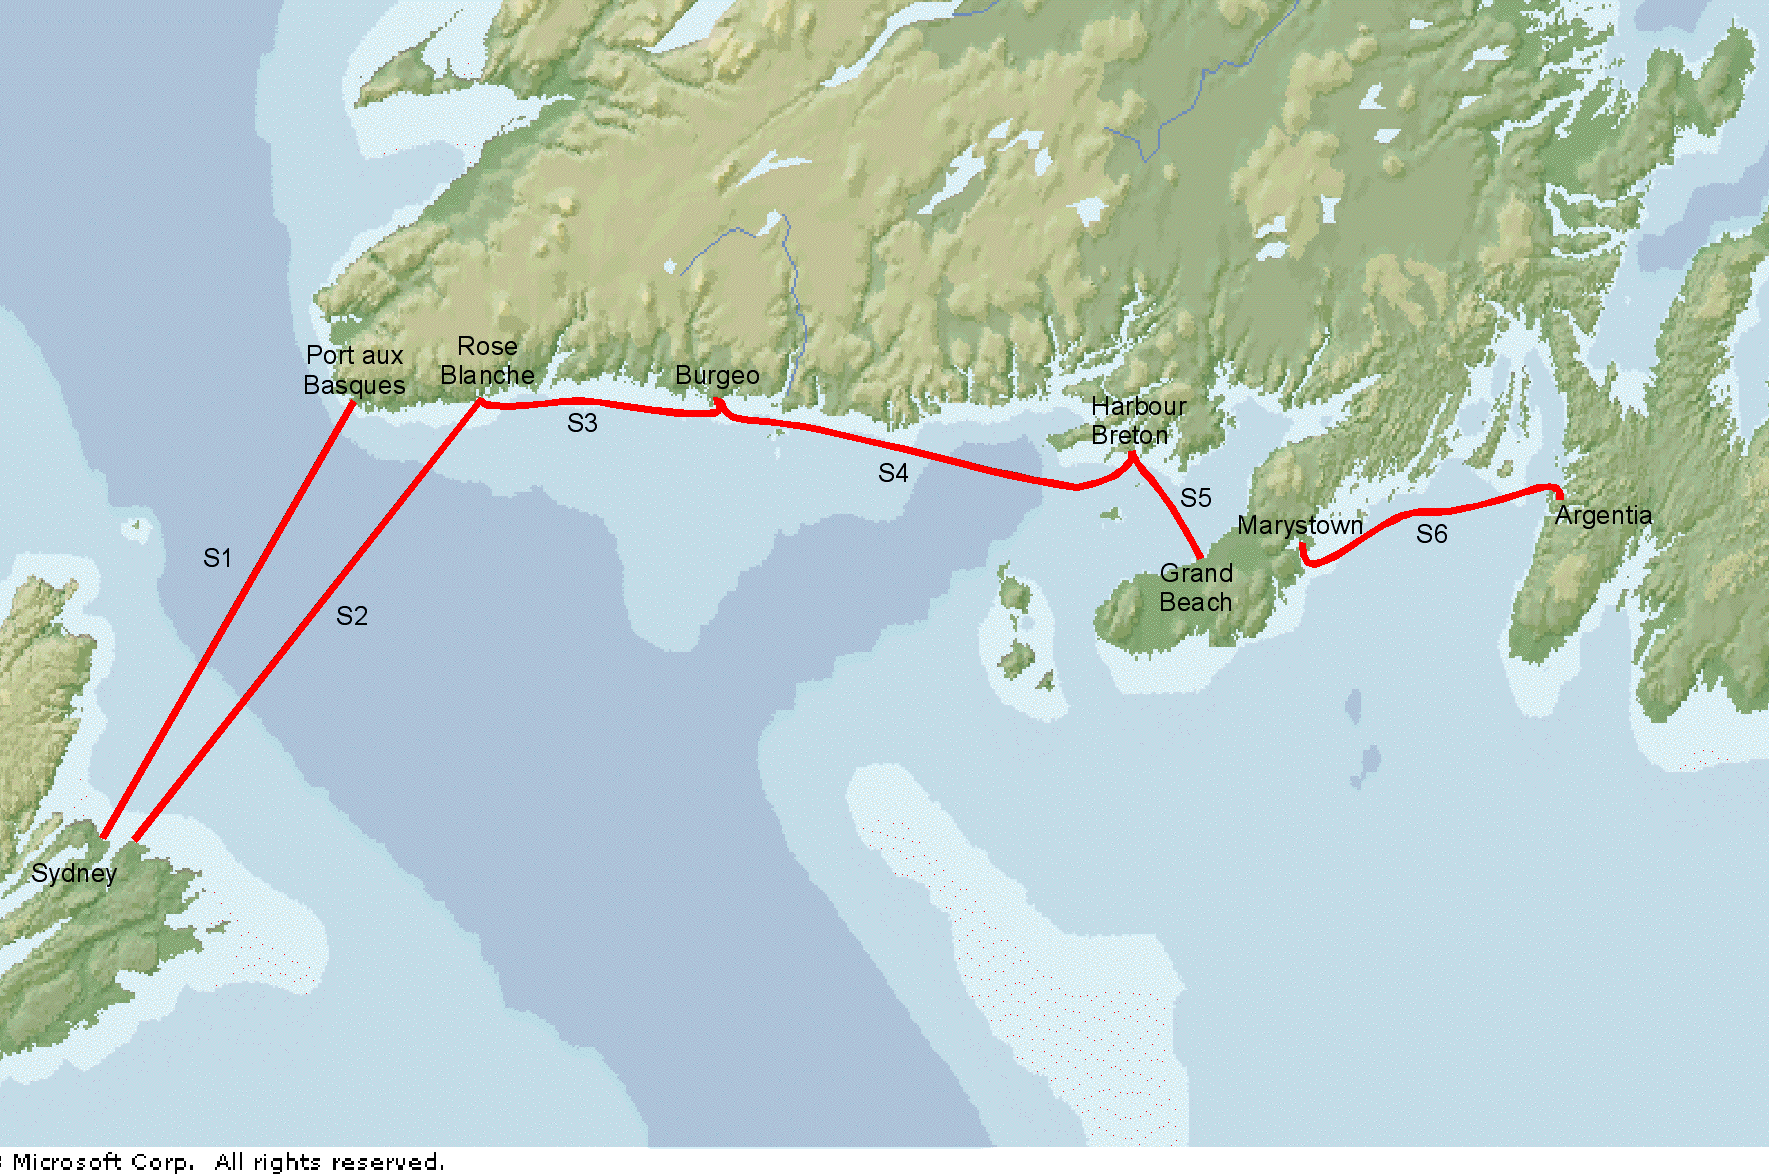 Undersea cables between Newfoundland, PEI and Cape Breton